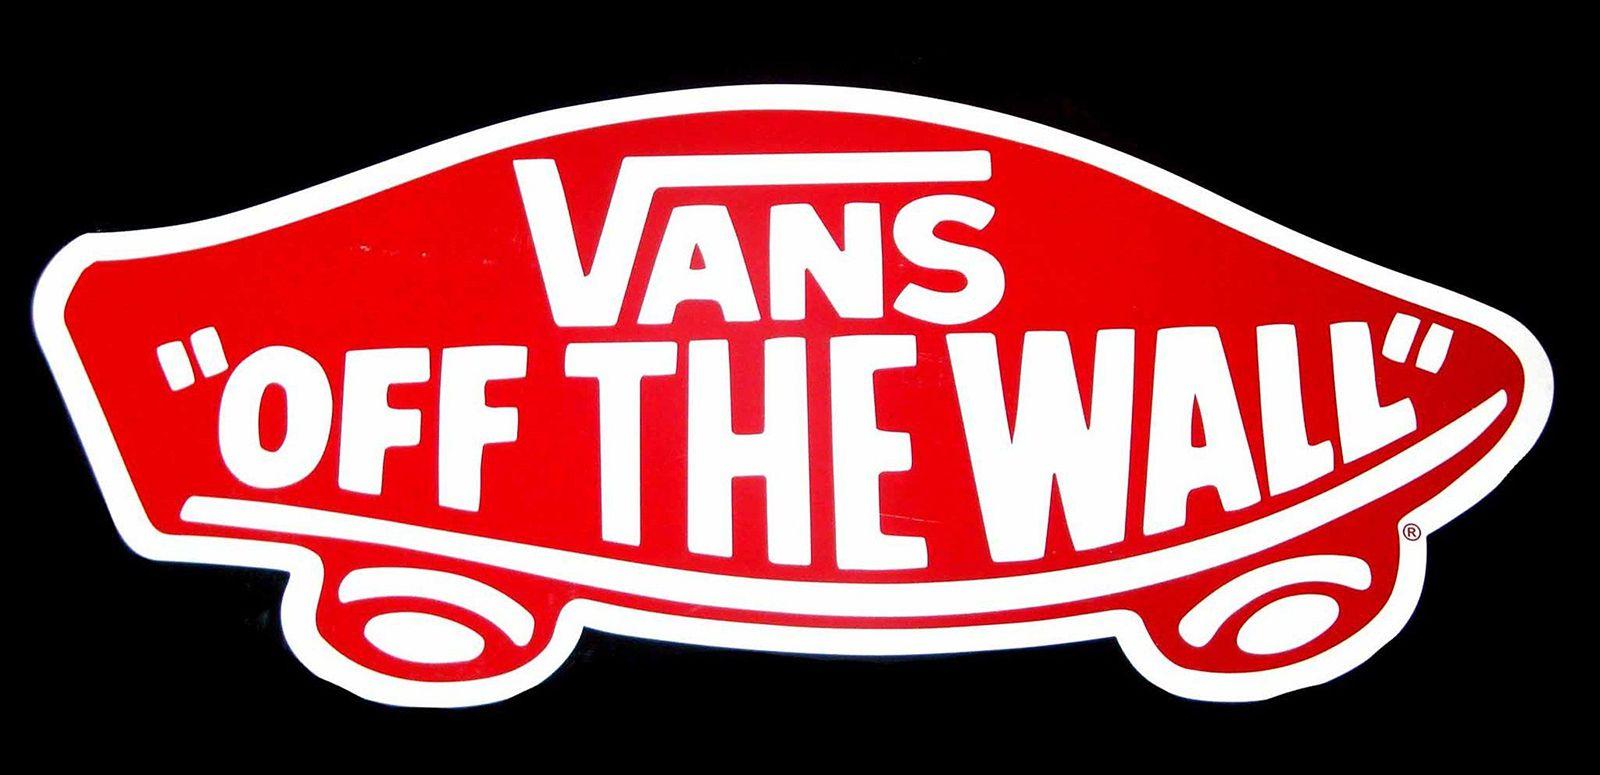 Off the Wall Logo - Vans Logo, Vans Symbol, Meaning, History and Evolution